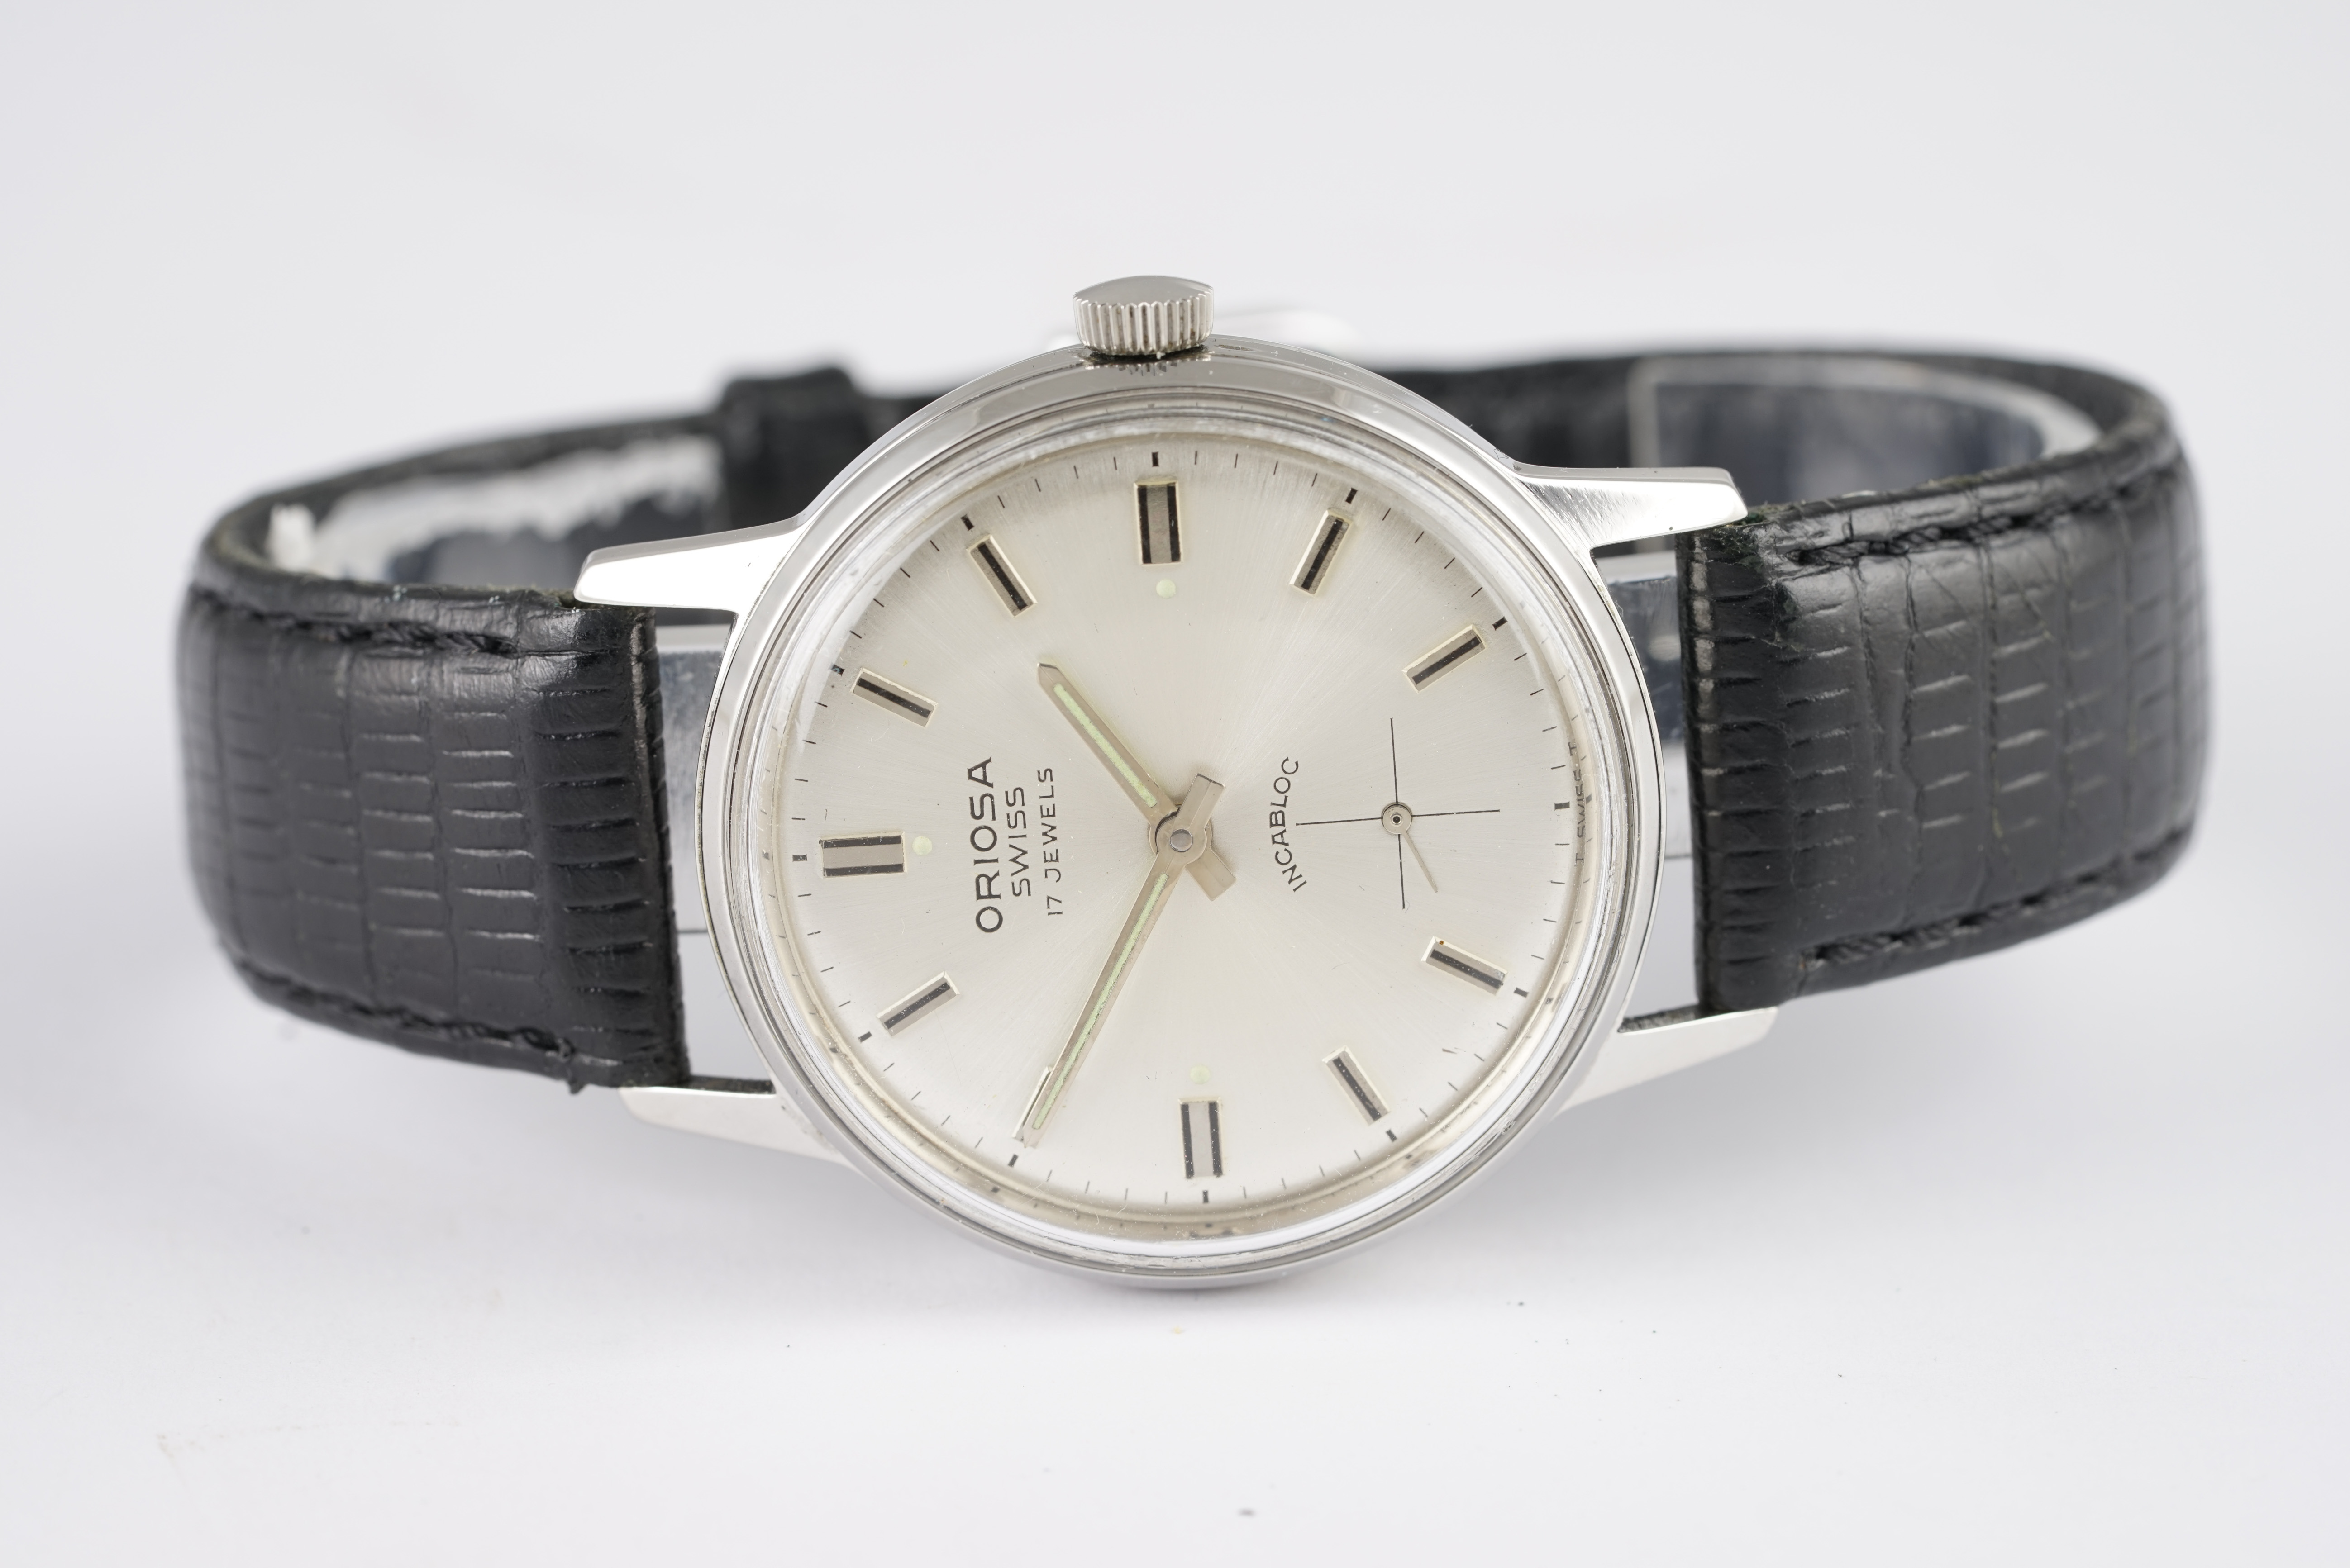 GENTLEMENS ORIOSA WRISTWATCH CIRCA 1960, circular silver dial with applied hour markers and hands,